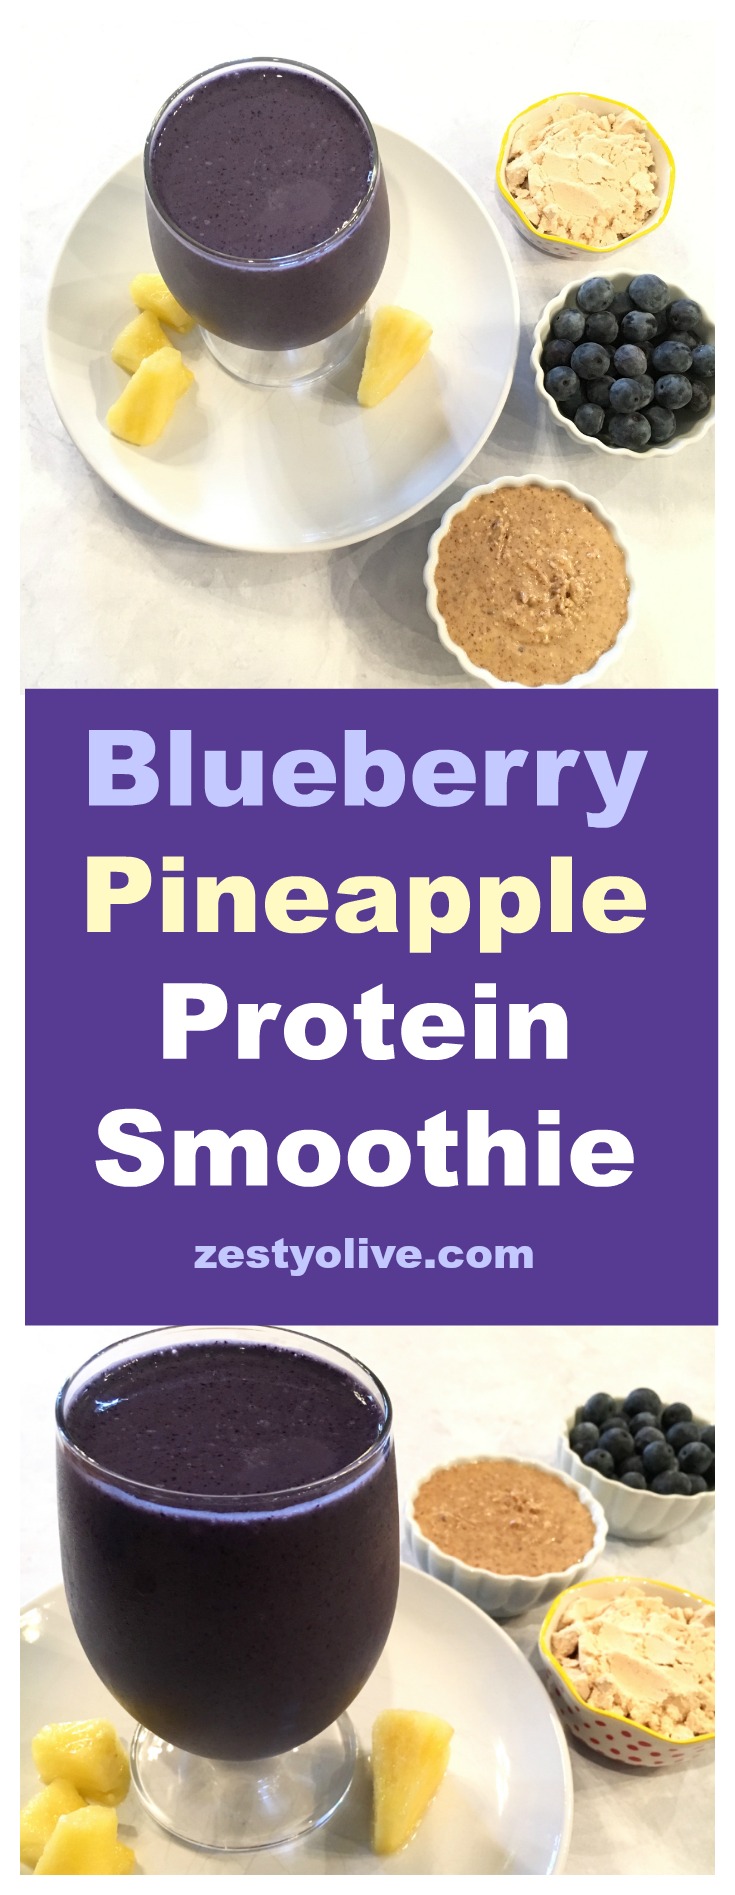 When blueberries are in season, this healthy Blueberry Pineapple Protein Smoothie is a favorite to make.